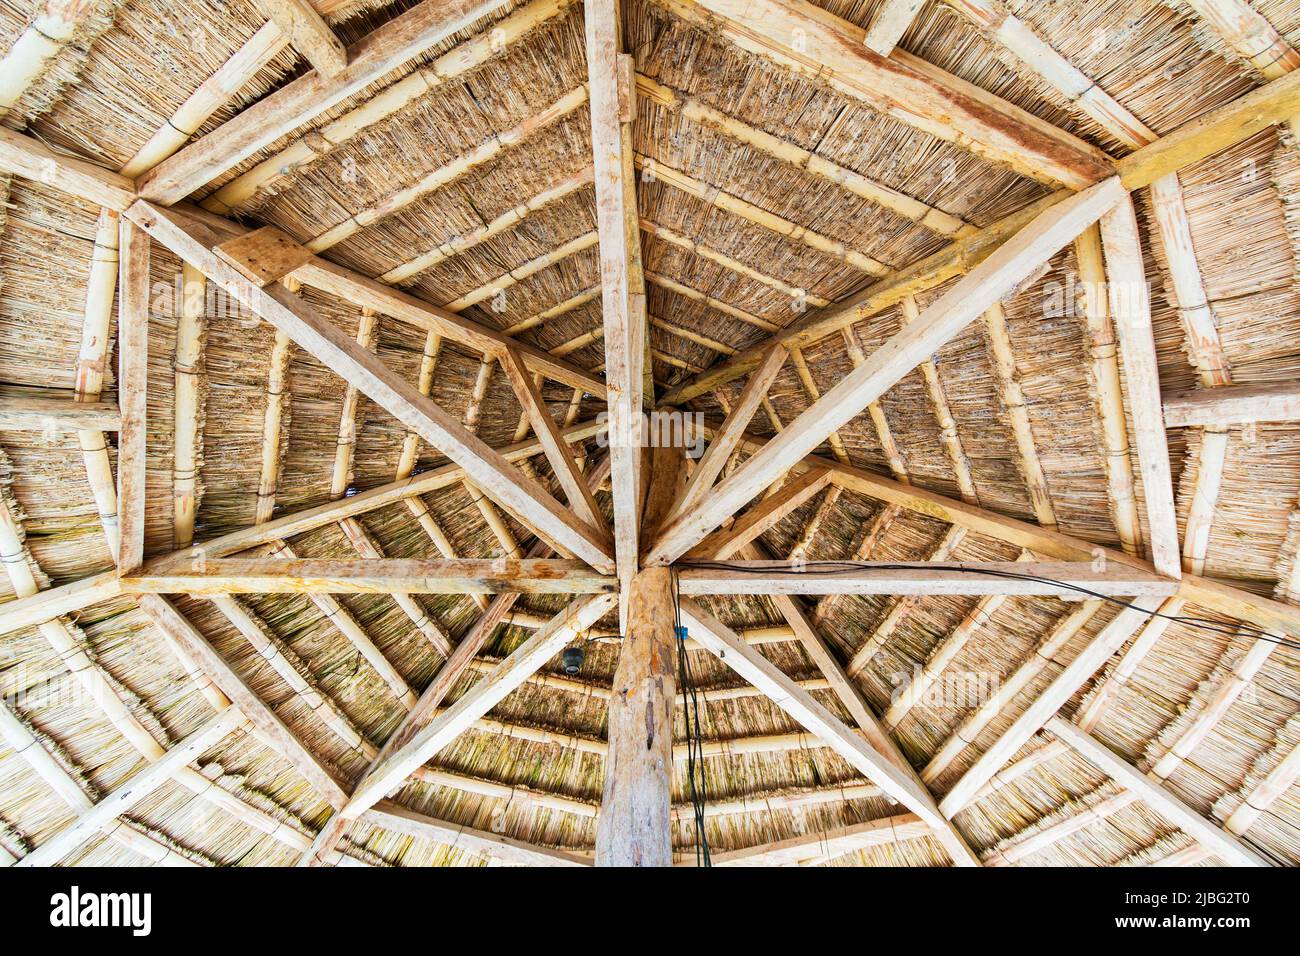 Underside of a wooden beach side hut made with nipa palm roofing in Basilan, Philippines Stock Photo